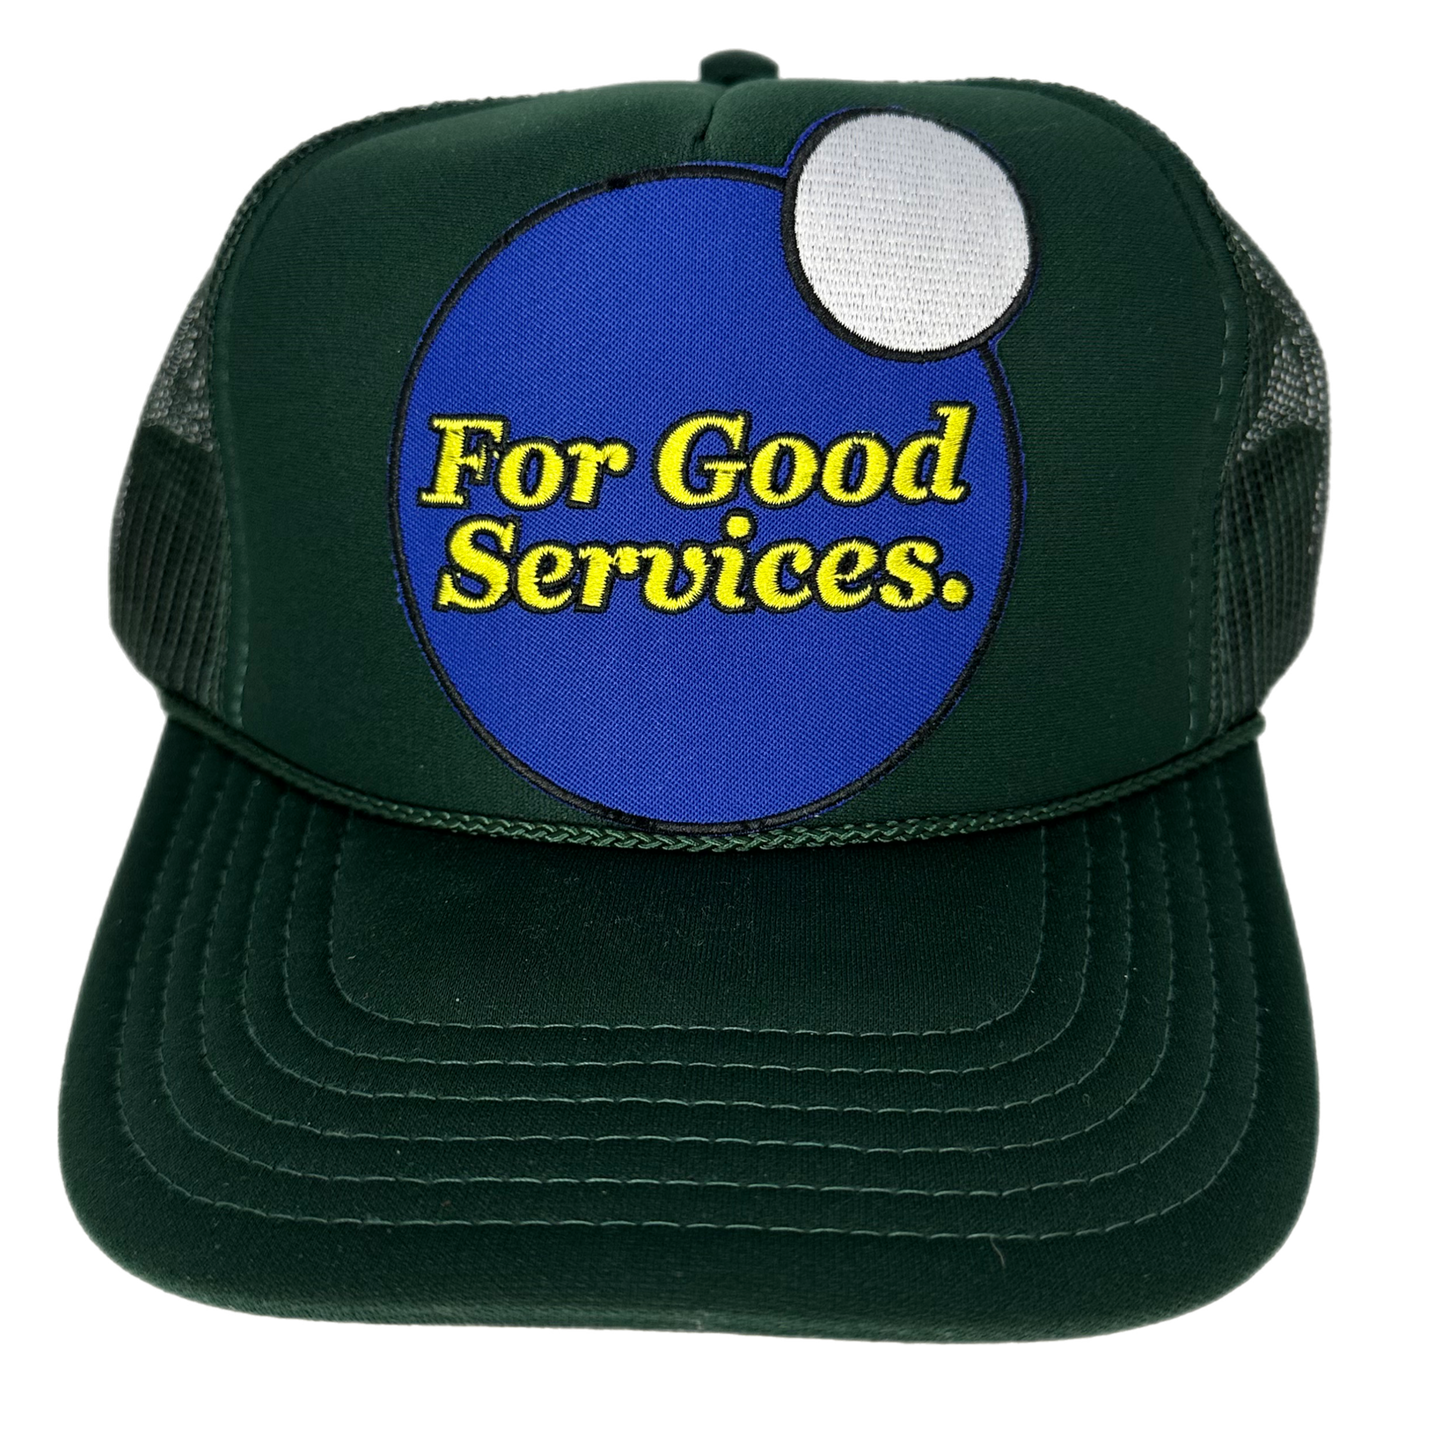 For Good Services - "Trucker Hat" - Green